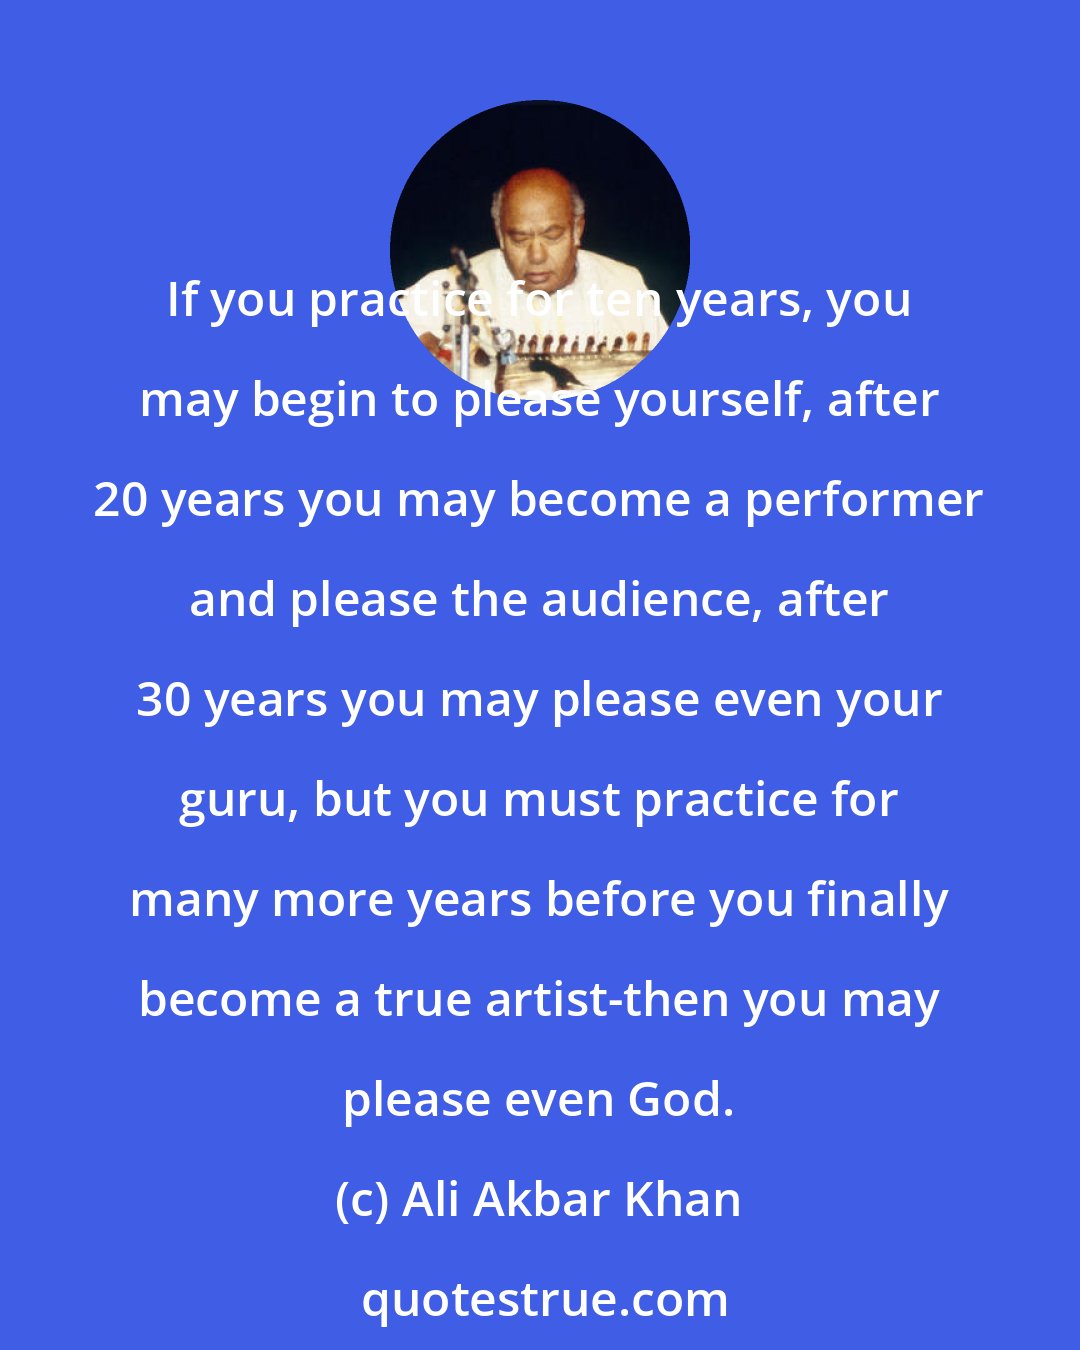 Ali Akbar Khan: If you practice for ten years, you may begin to please yourself, after 20 years you may become a performer and please the audience, after 30 years you may please even your guru, but you must practice for many more years before you finally become a true artist-then you may please even God.